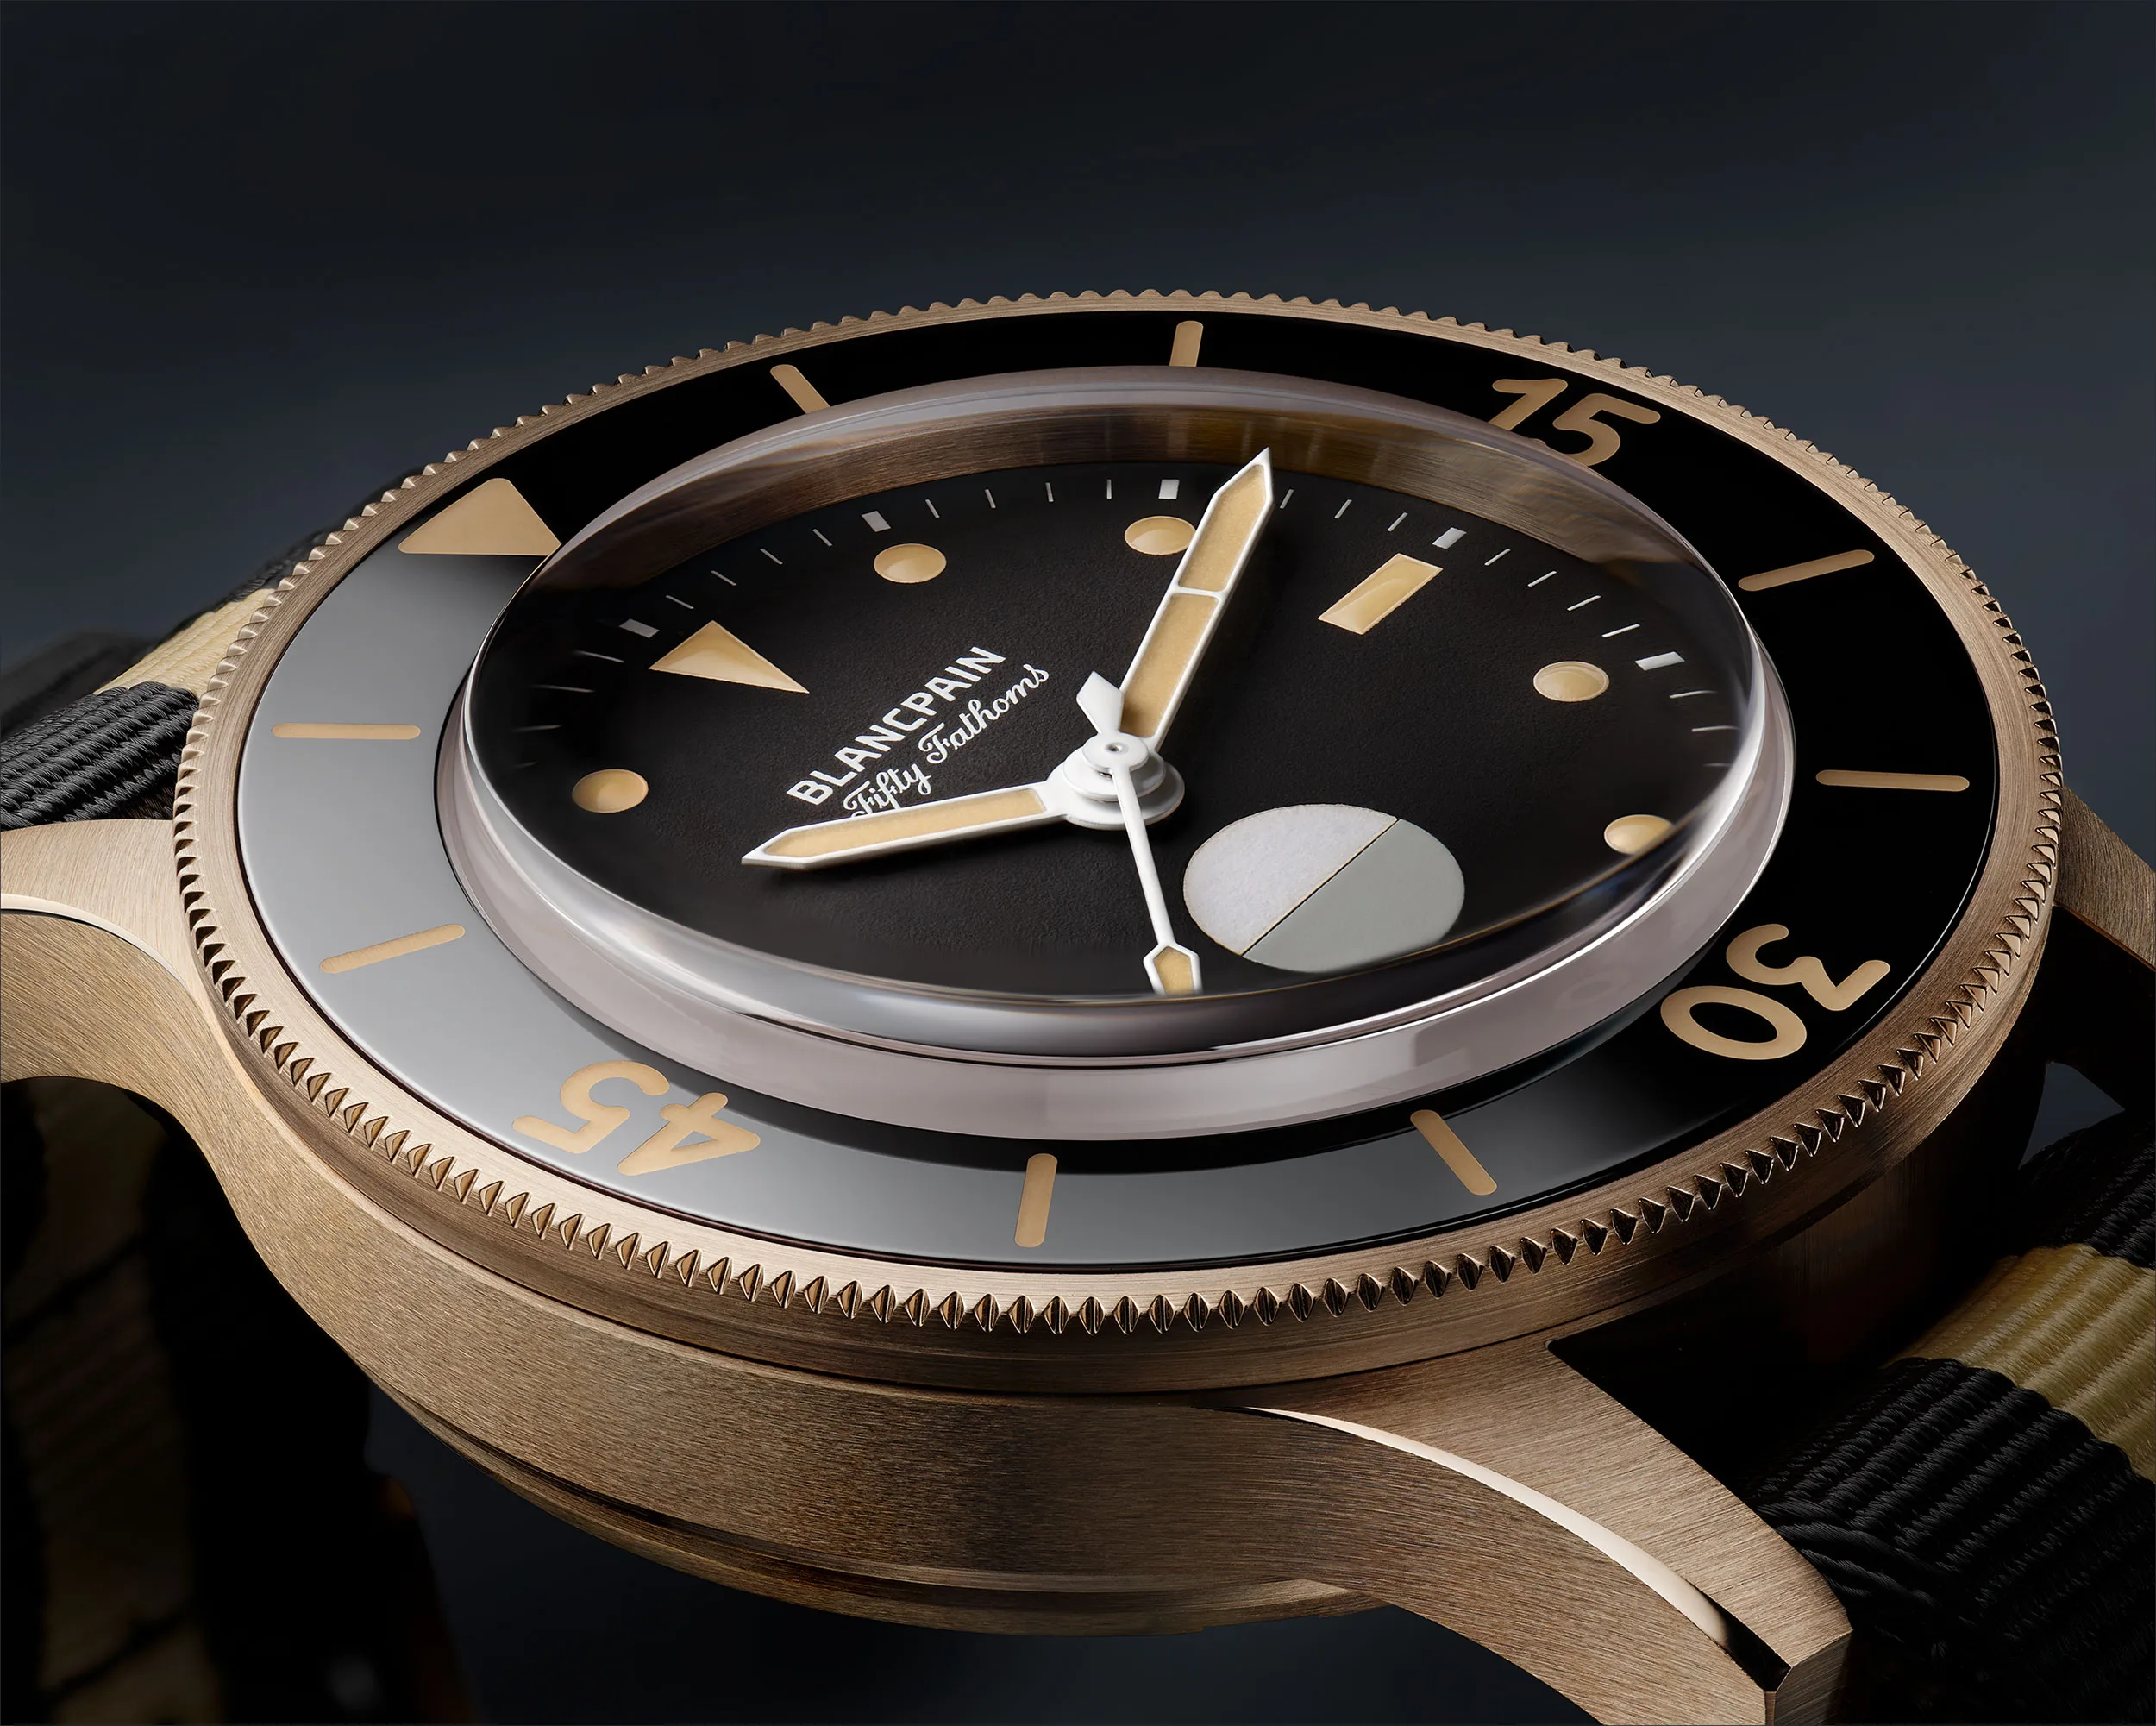 Act 3 of the 70th Anniversary of the Blancpain Fifty Fathoms